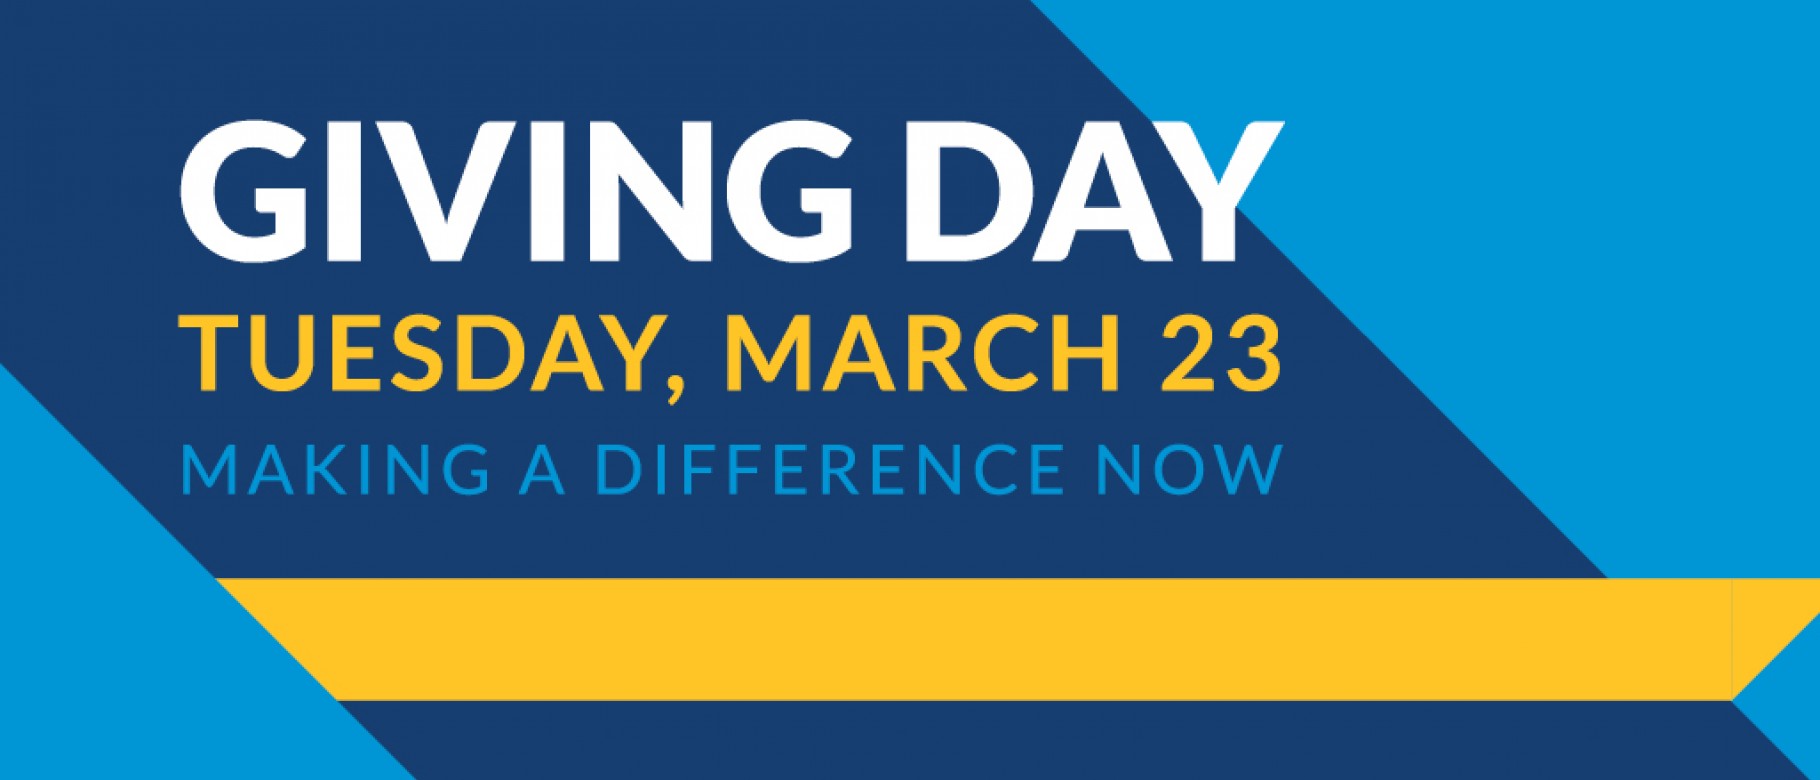 UNE's Giving Day is Tuesday, March 23